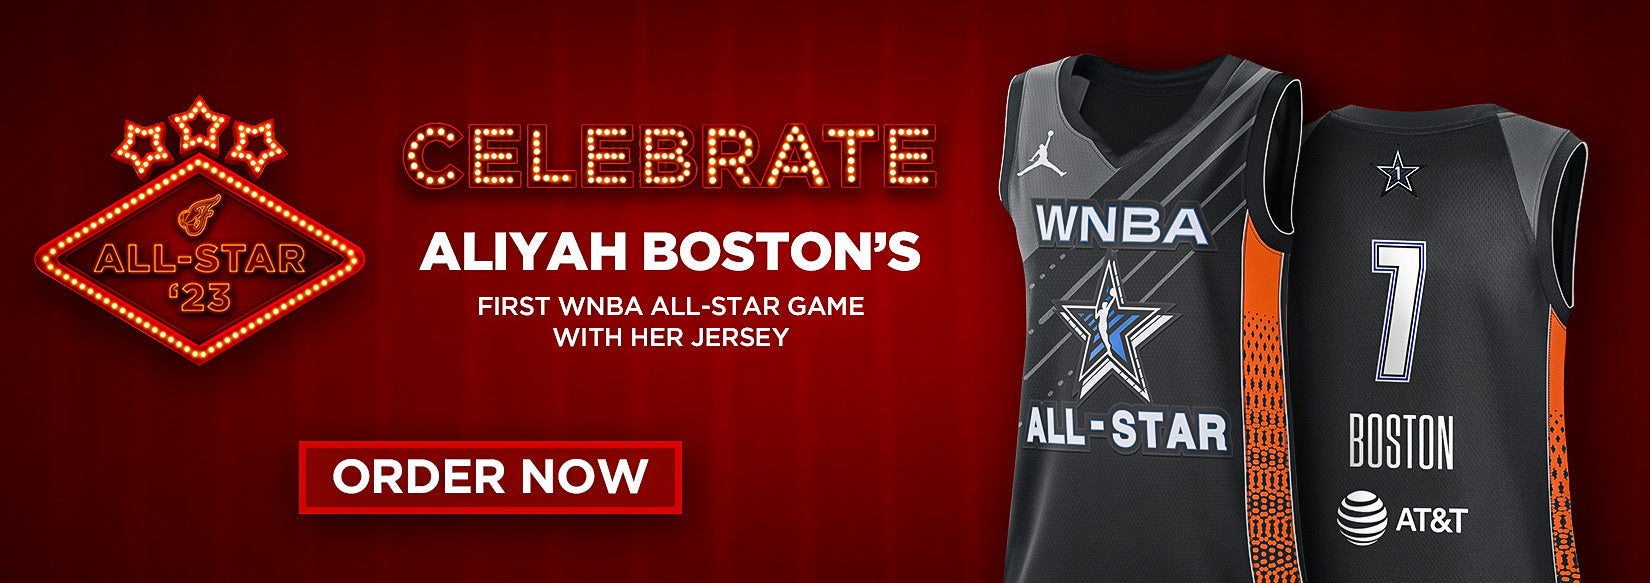 Celebrate Aliyah Boston's First WNBA All-Star Game With Her Jersey ORDER NOW